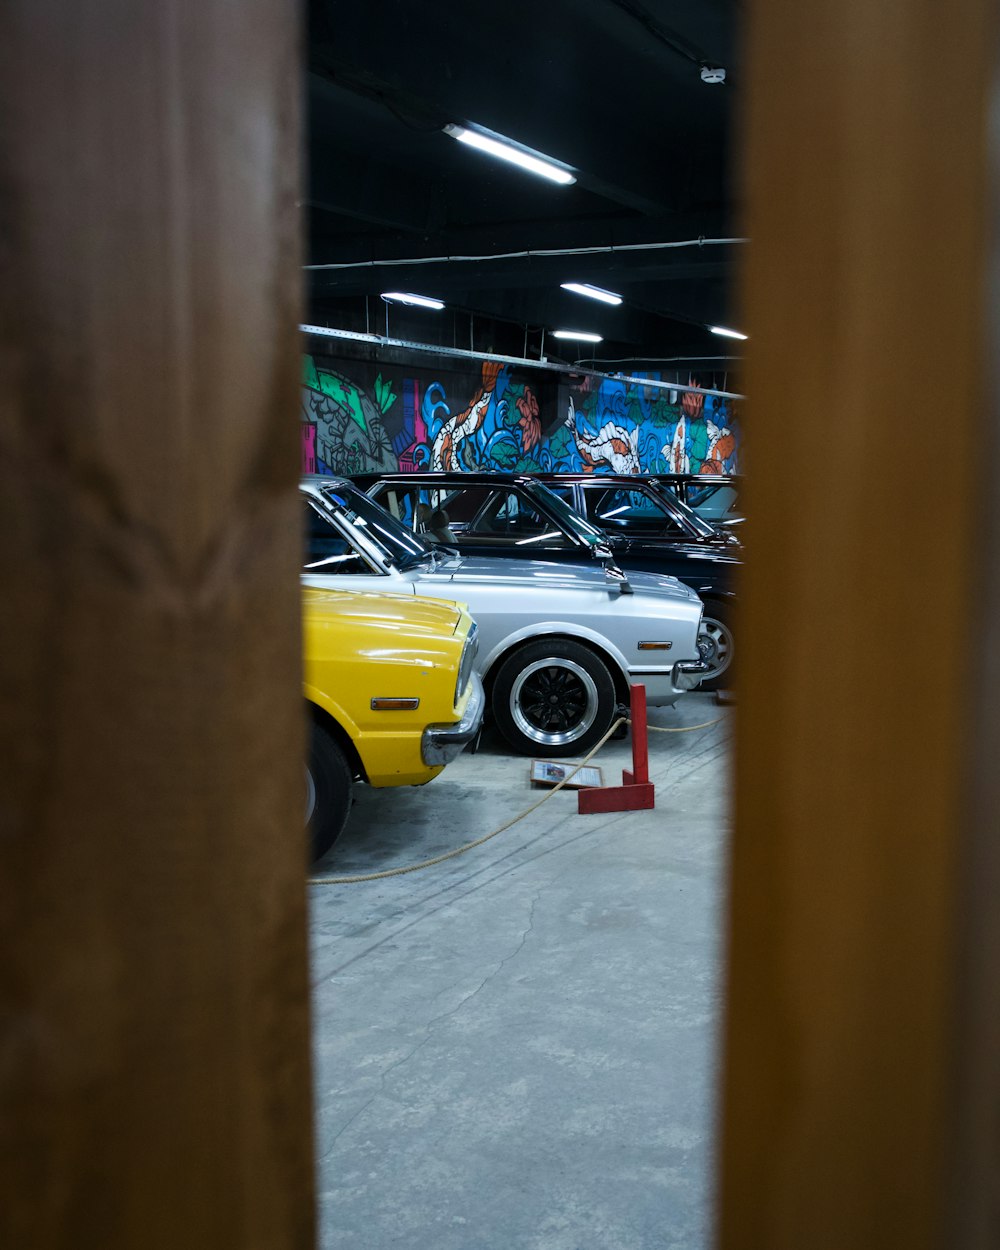 a yellow car parked in a garage next to other cars